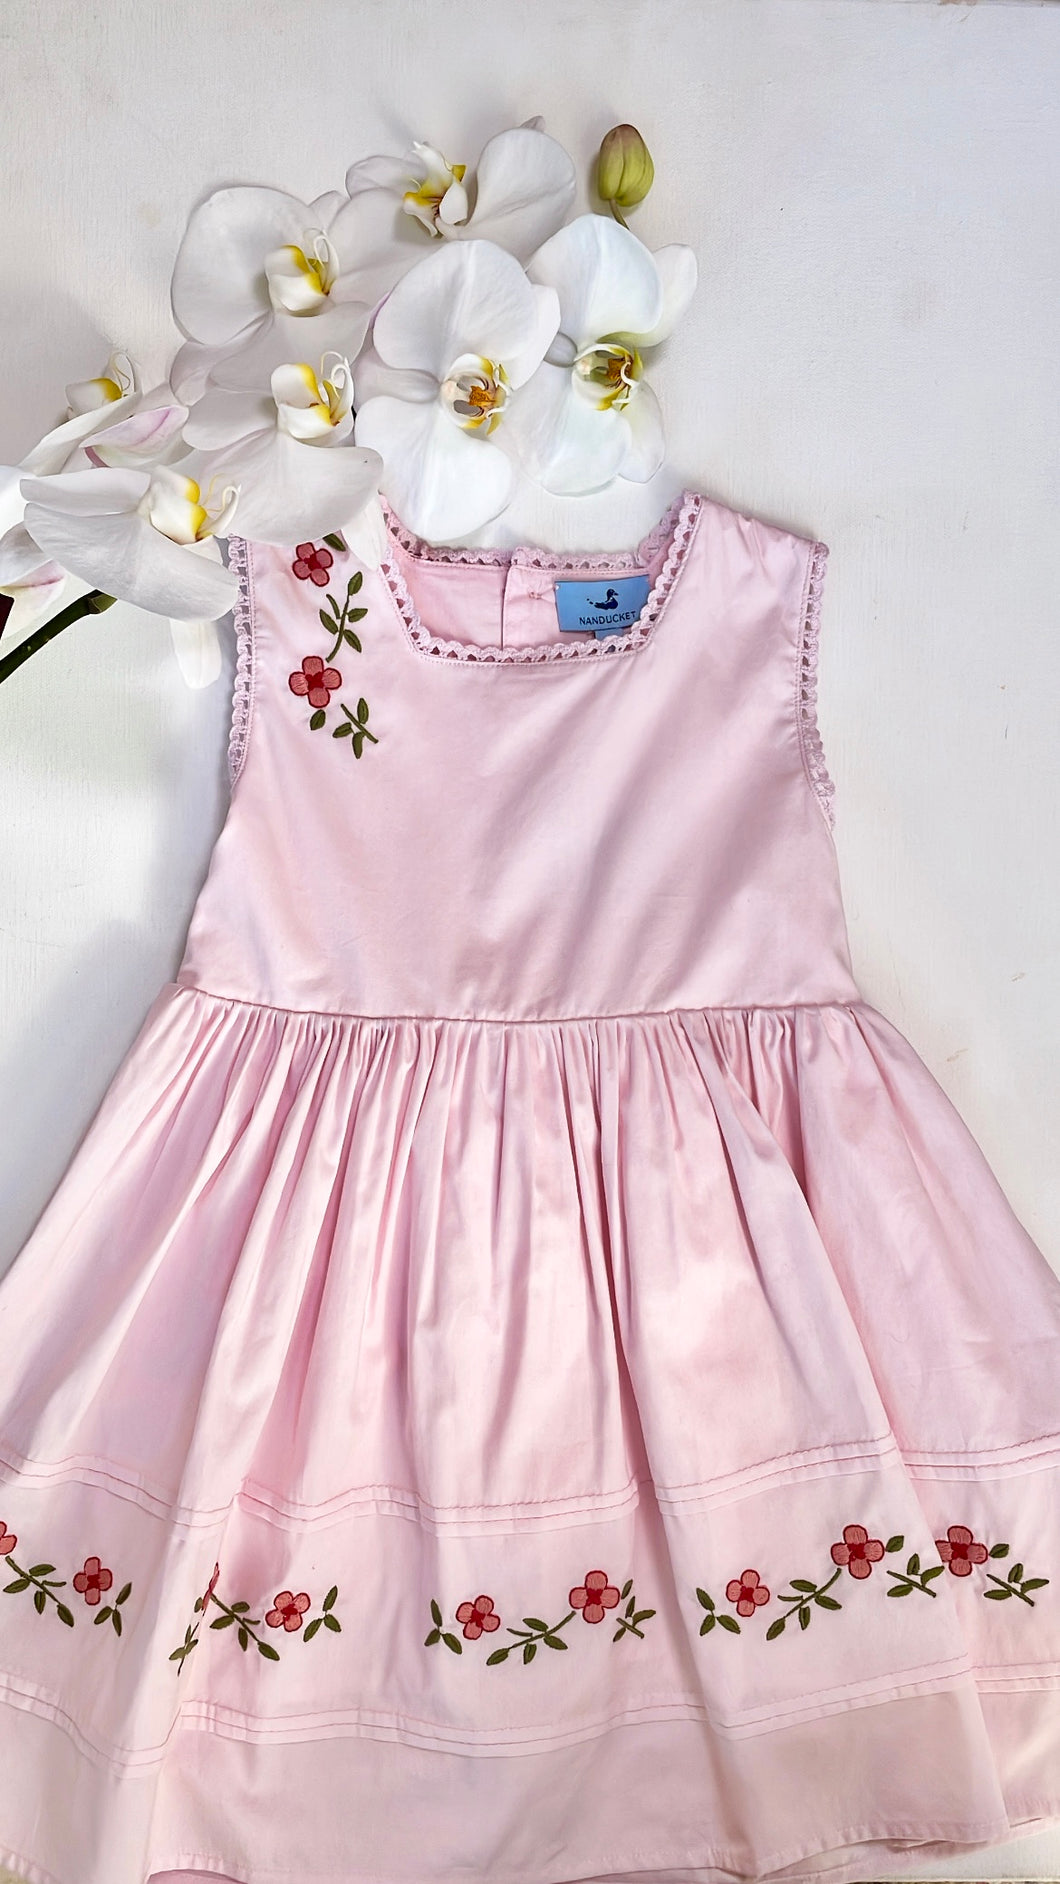 PINK ROSE EMBROIDERED DRESS